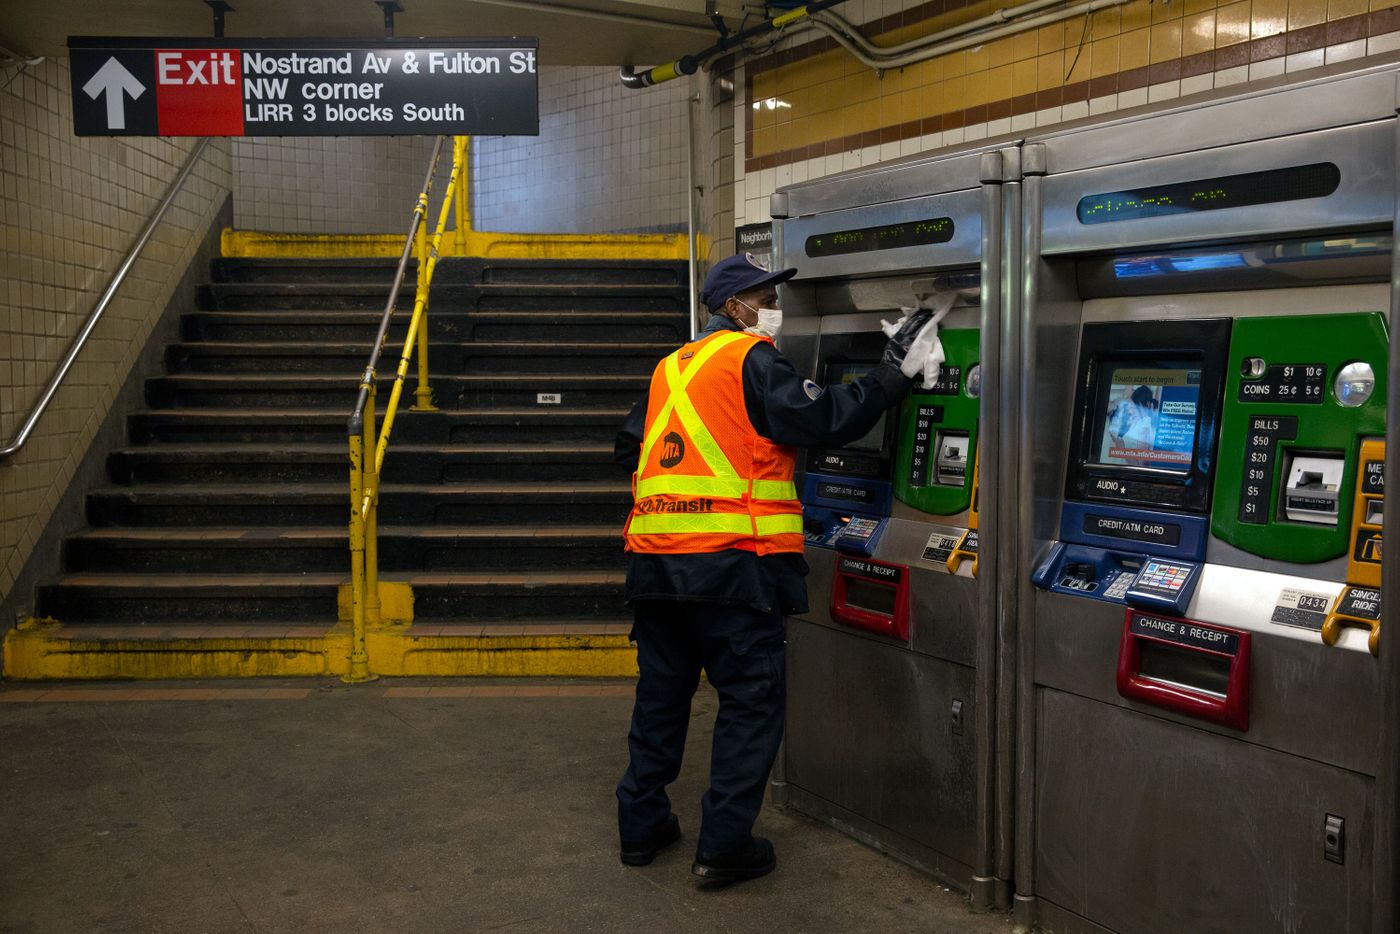 An MTA workers disinfects the Nostrand Avenue station.